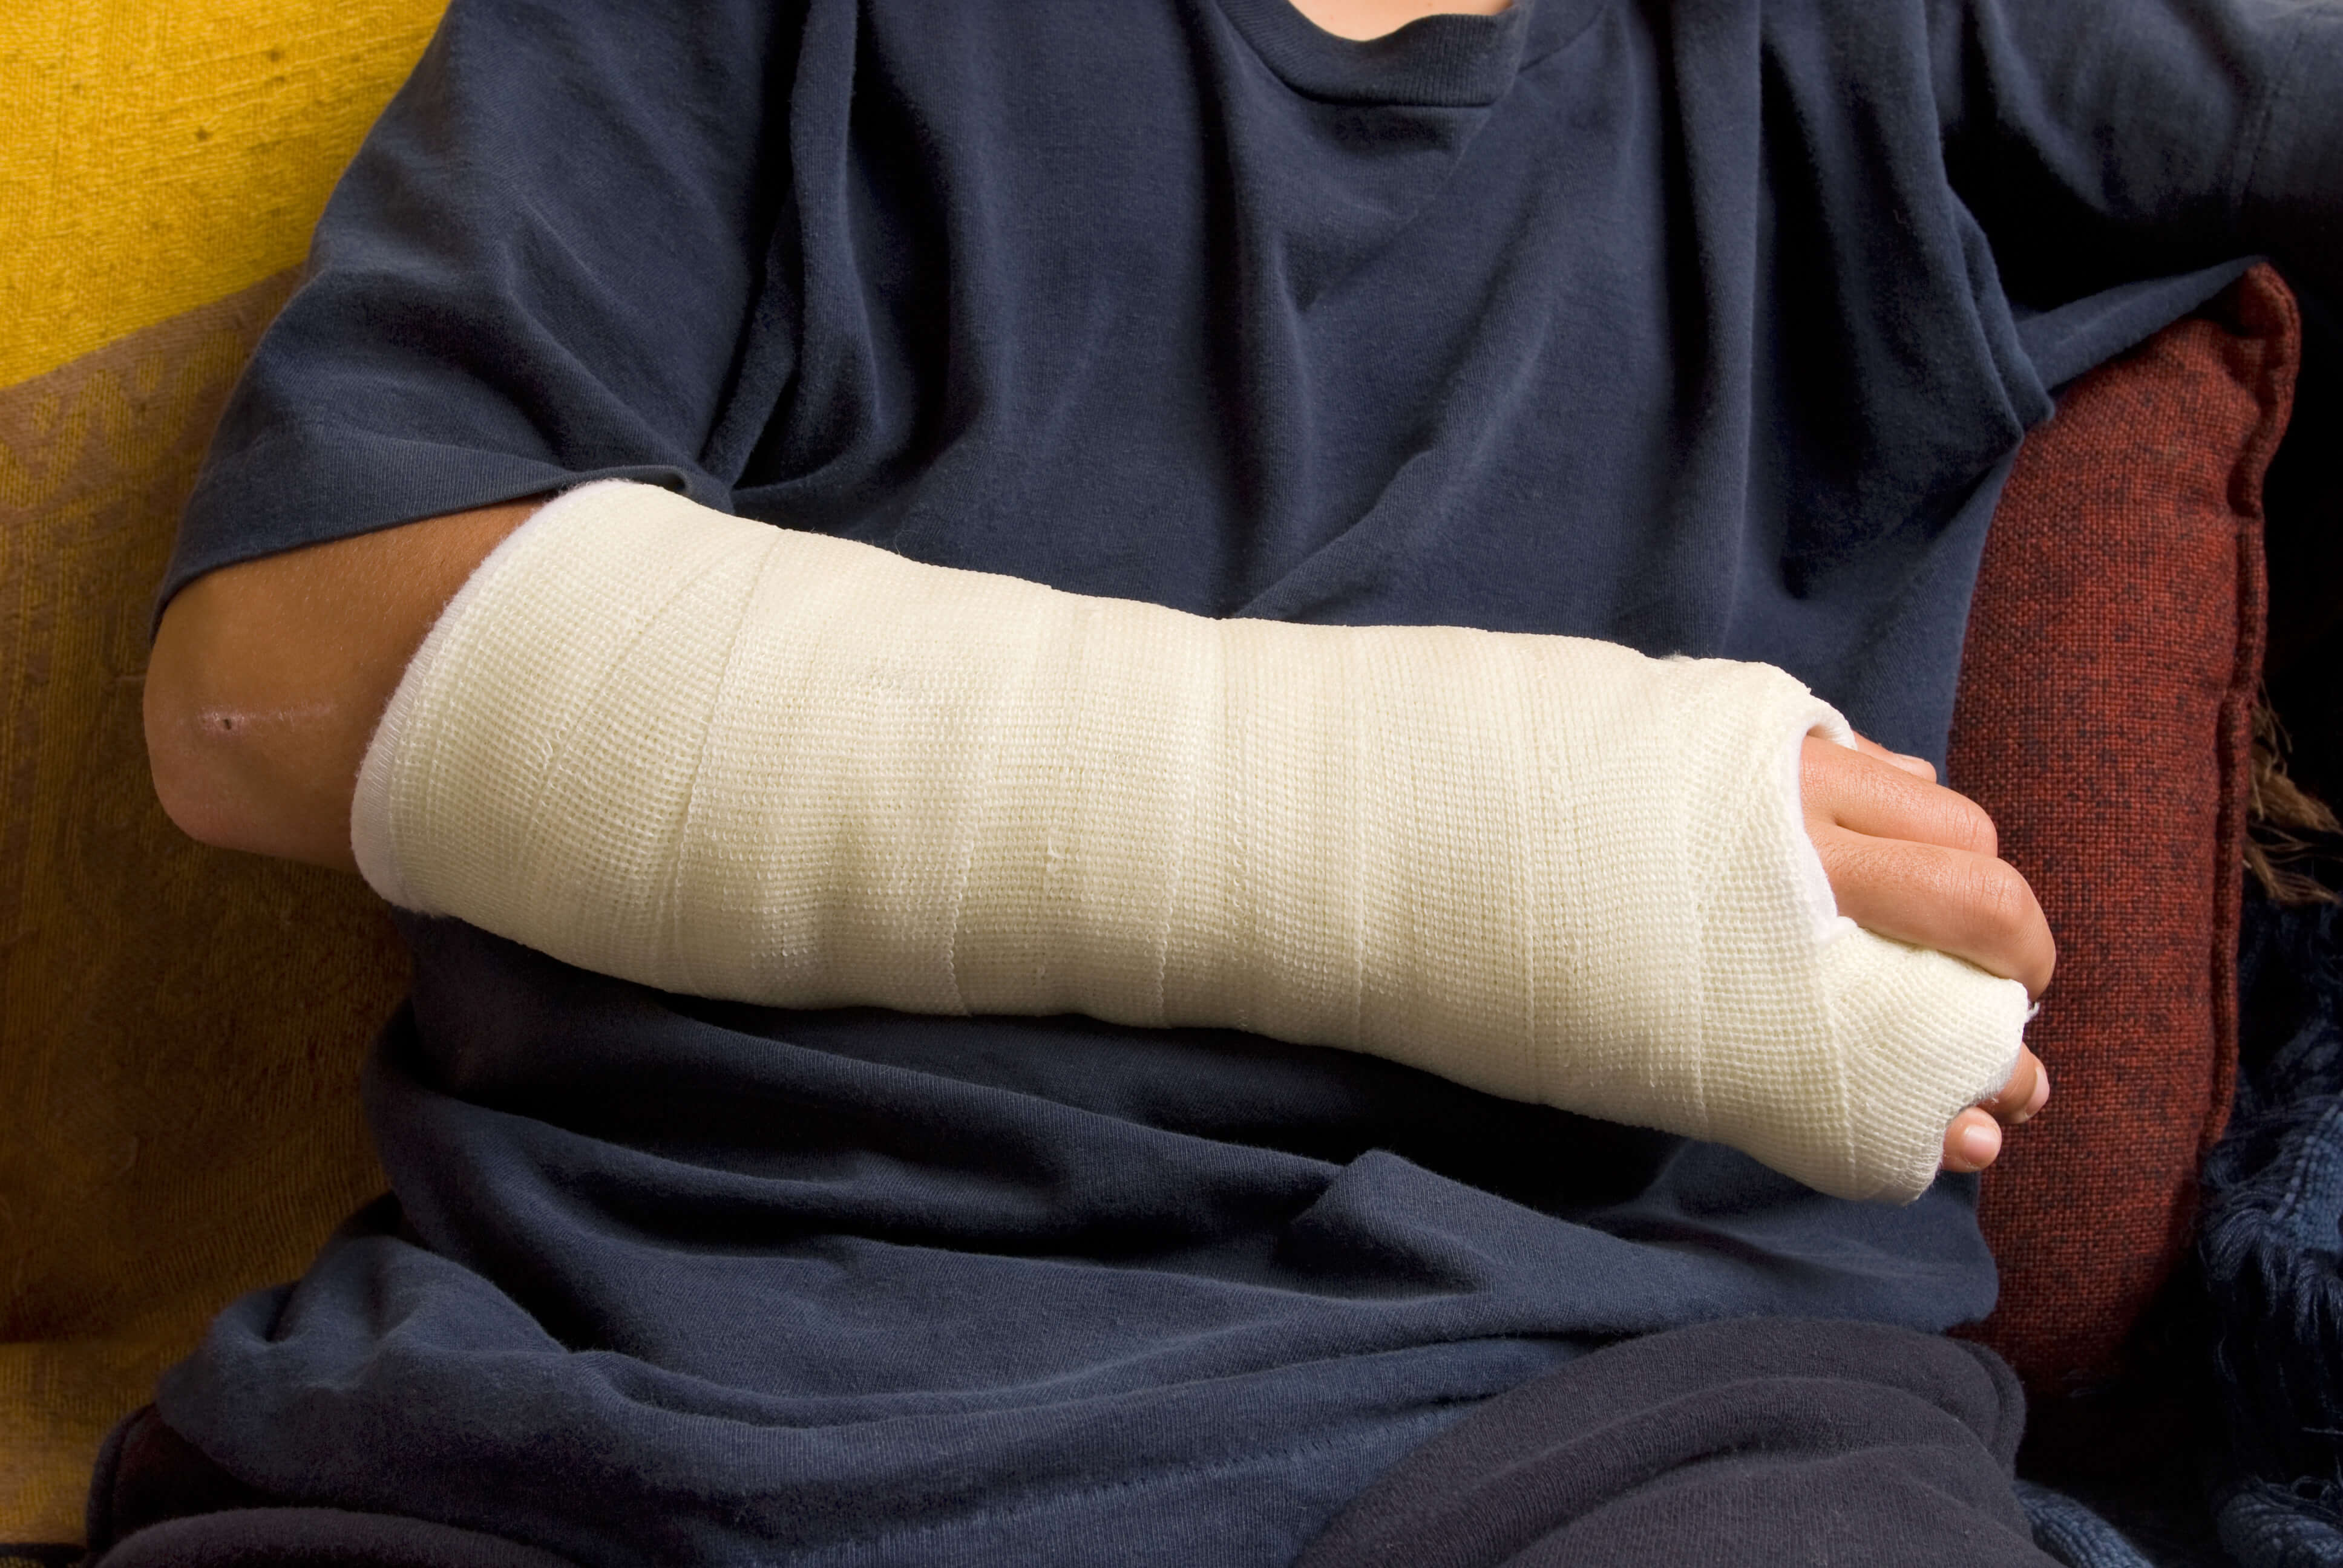 Arm cast of injured person